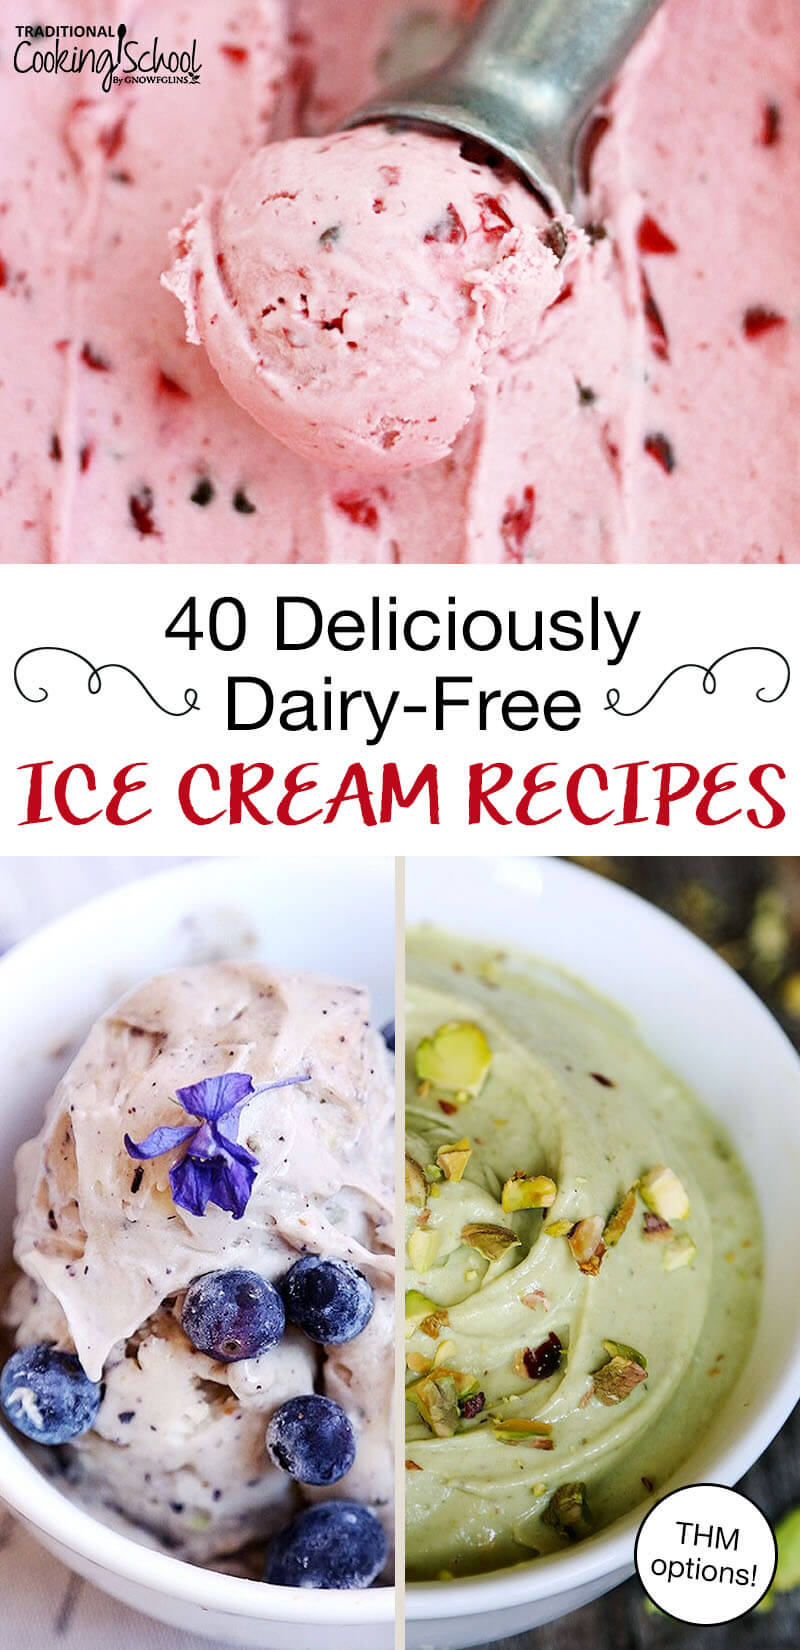 photo collage of brightly colored homemade ice creams. Text overlay: "40 Deliciously Dairy-Free Ice Cream Recipes (THM options!)"